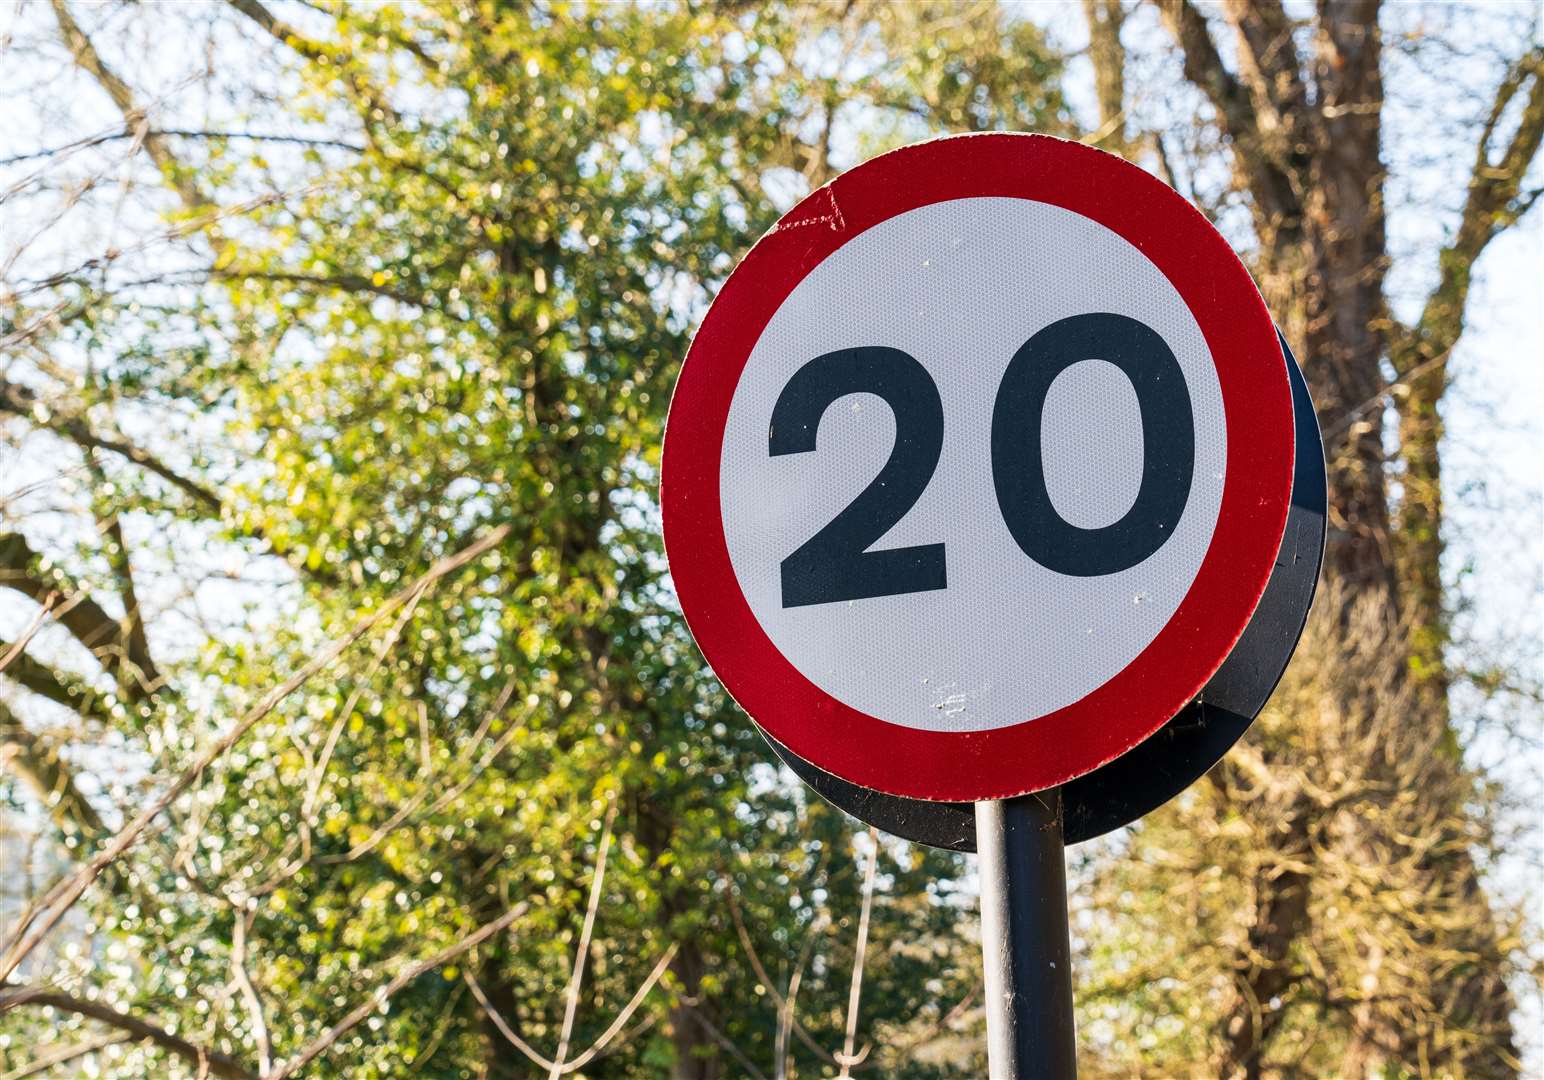 20mph signs have been erected in parts of many Highland communities.